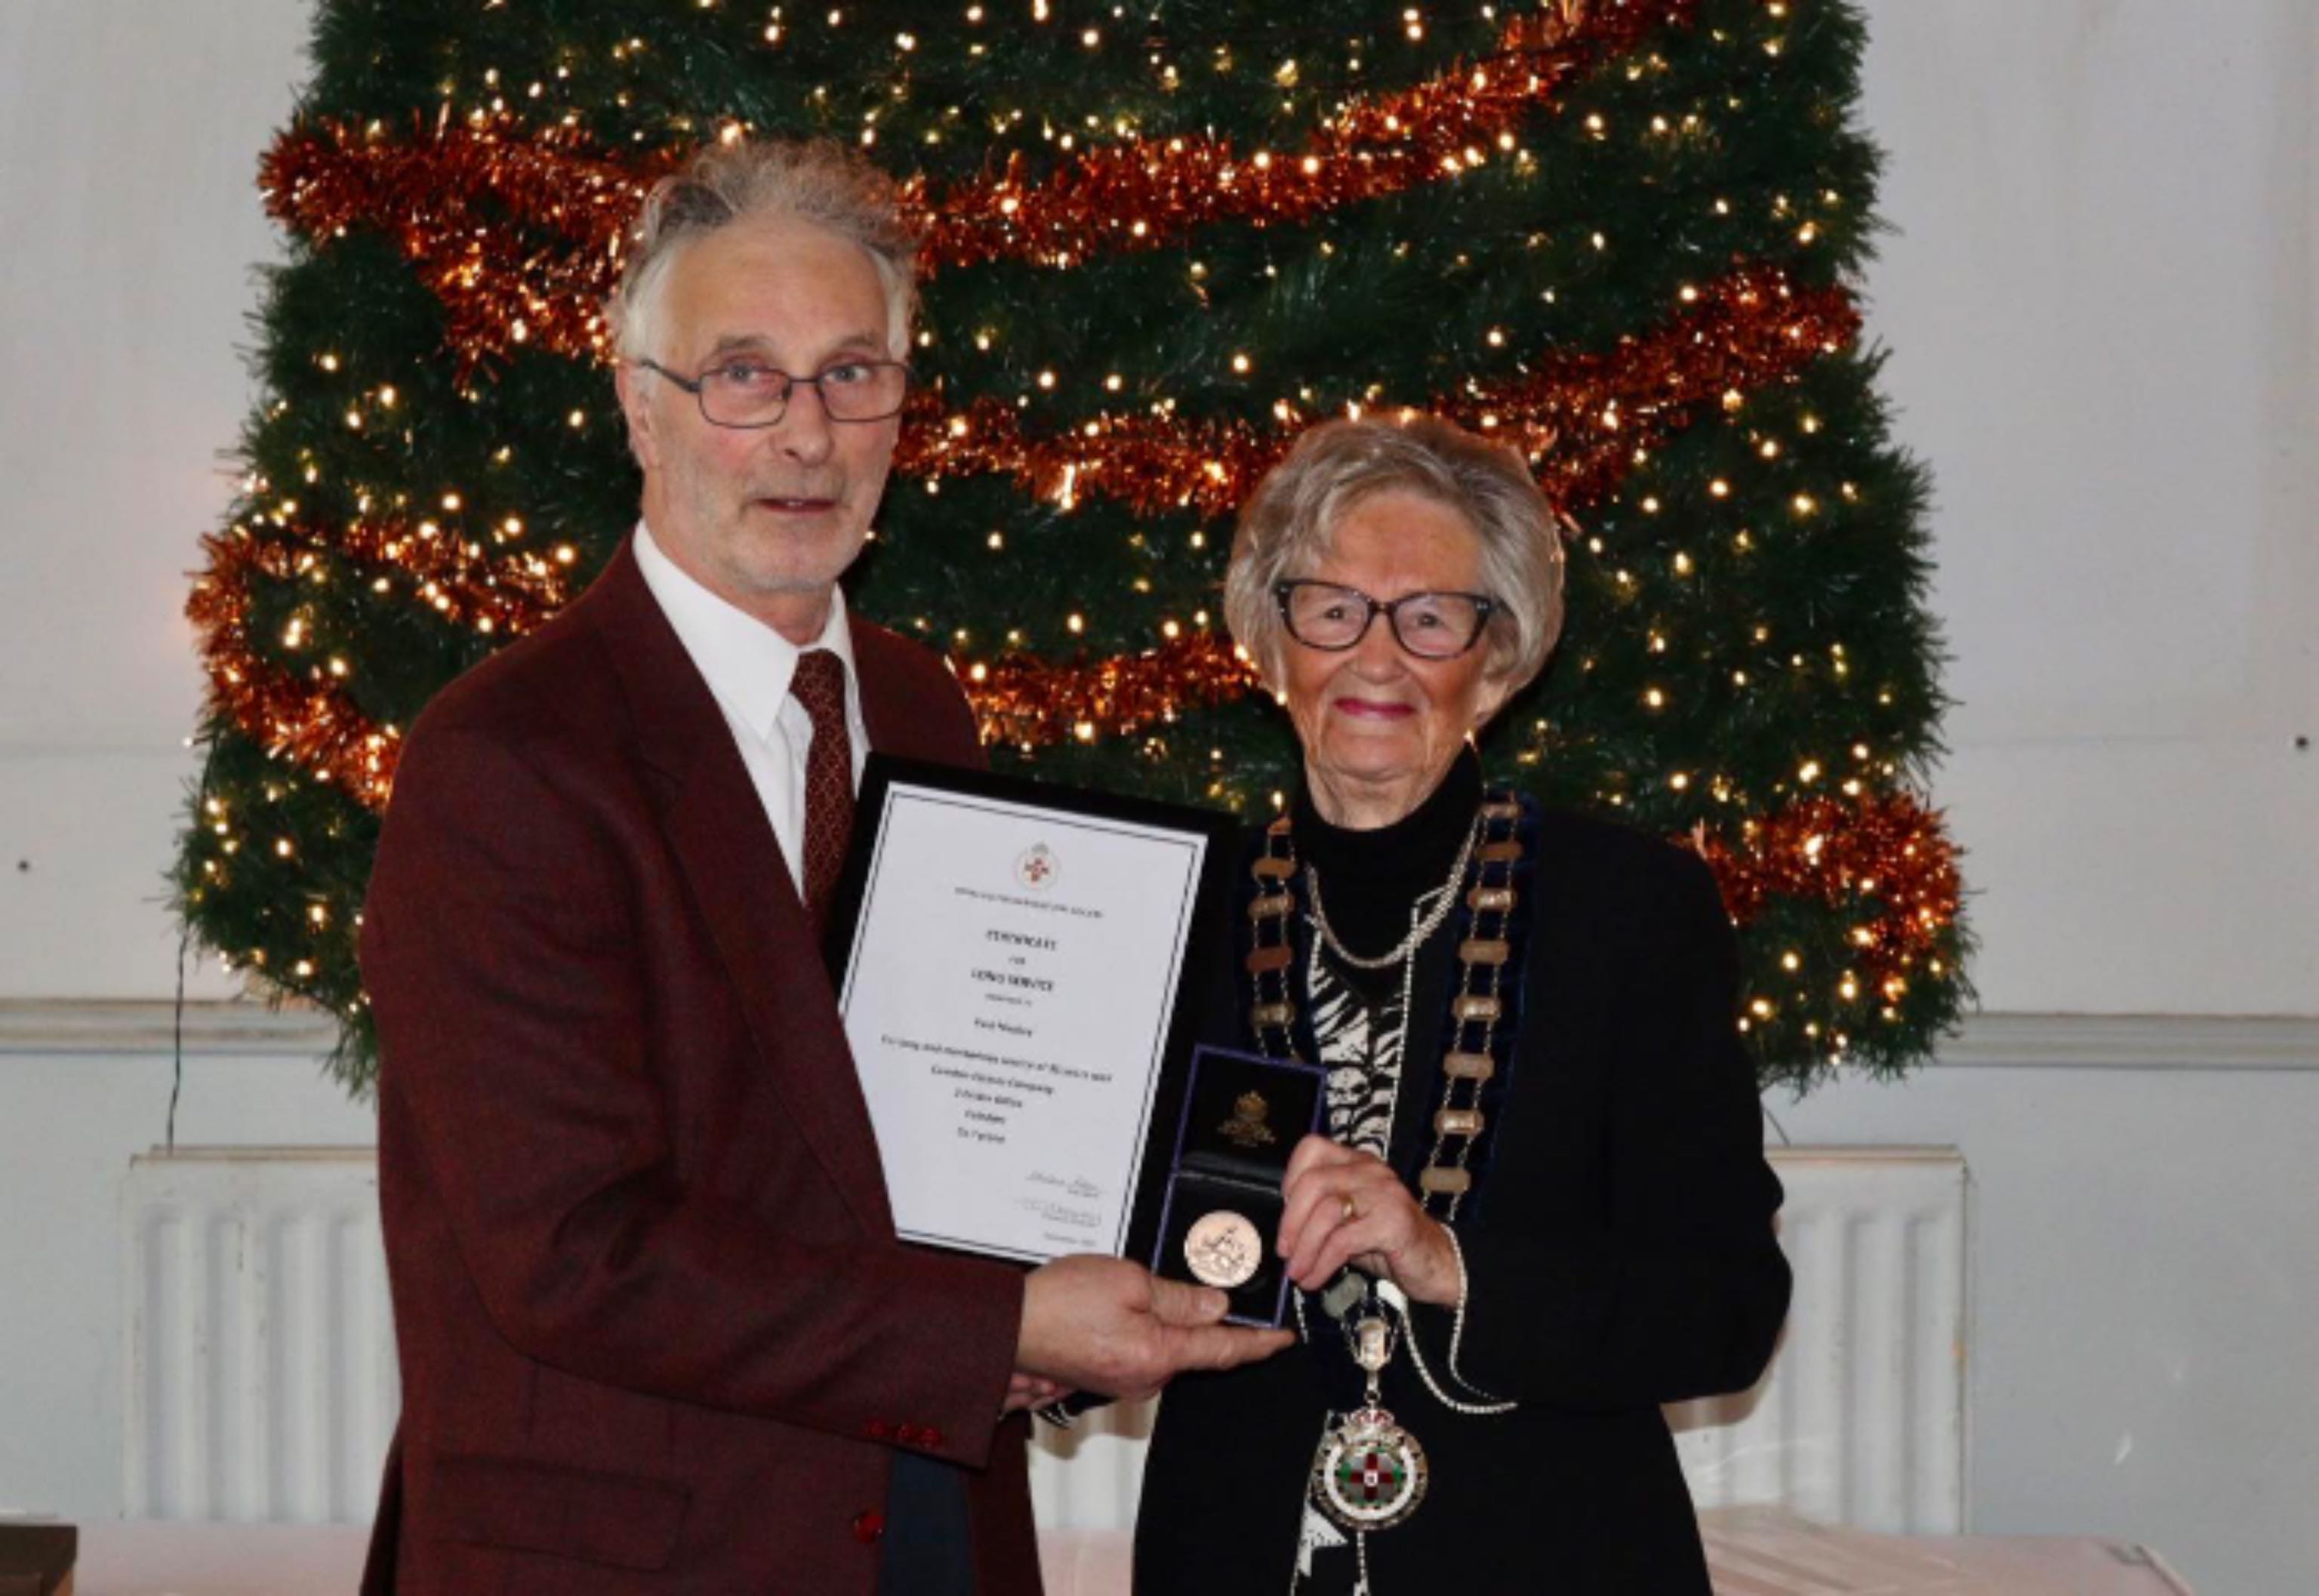 Paul Nicolay was awarded a medal and certificate in recognition of 35 years of employment